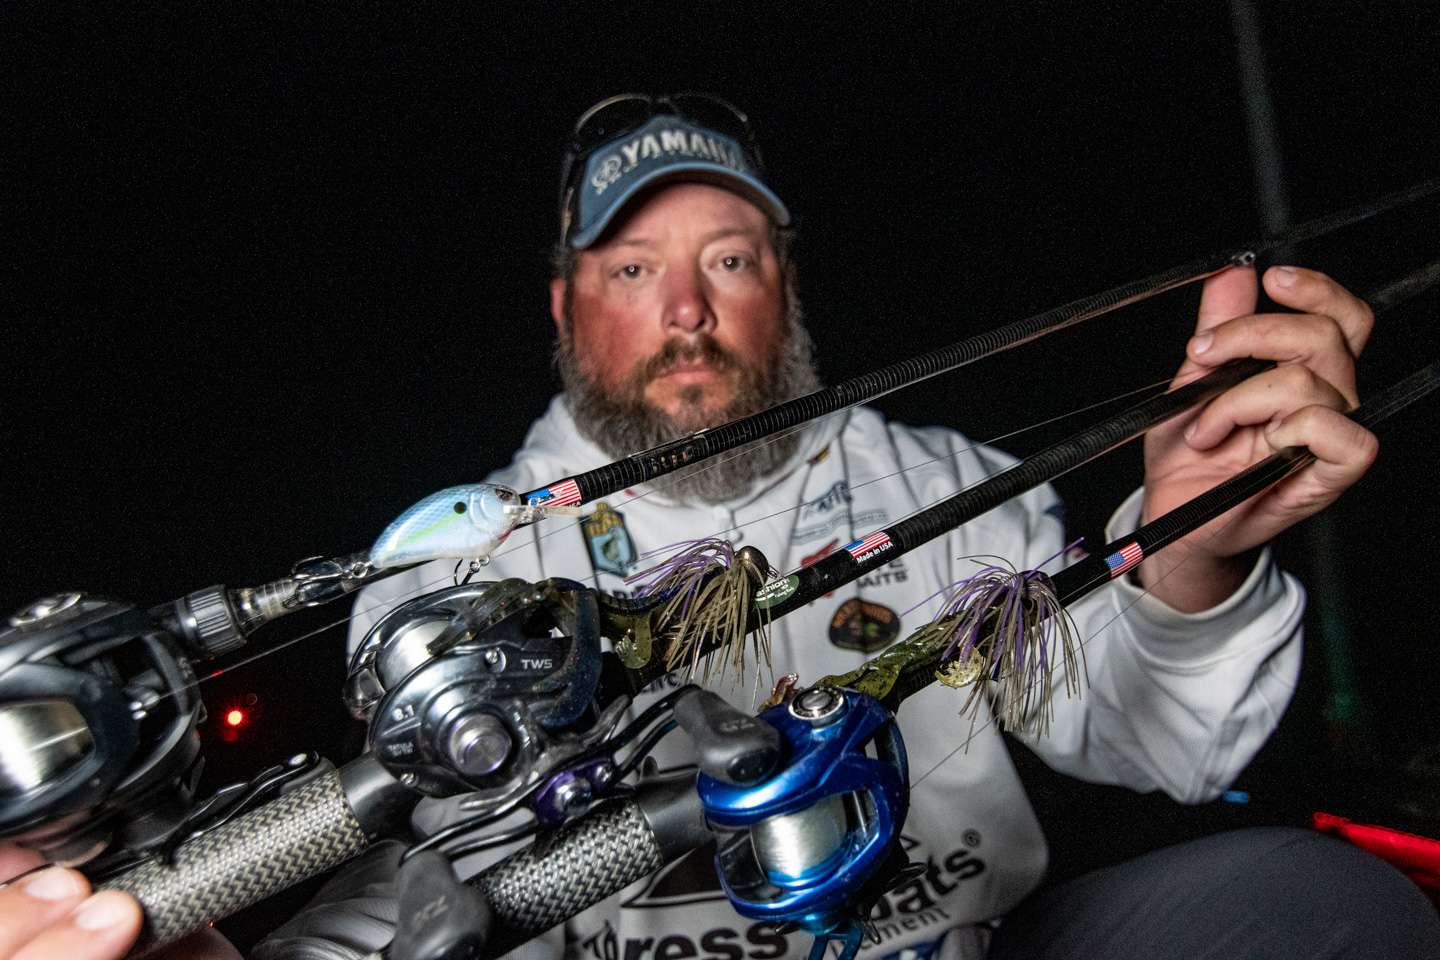 <b>Harvey Horne (10th, 33-8) </b><br>
Horne jumped from 36th place on Day 1 to 6th on Day 2 with 17-14. He accomplished that mainly with a SPRO Little John DD crankbait in spooky nasty color pattern on rocky, wind-blown points. âItâs a little clear, translucent shad pattern,â Horne said. âIt seemed to be something they wanted this week, something subtle that they couldnât see real well. I think that was the key for me, being able to go behind guys and pick up a few extra bites with it.â
<br><br>
Horne also used two jigs on those same rocky, wind-blown points to catch some key fish â a 3/4-ounce Green Fish Tackle Crawball football jig and a 1-ounce jig made by Hook, Line & Sinker, his hometown tackle store in Bella Vista, Ark. He trailed them with a Big Bite Baits Fighting Frog in brown and green pumpkin/purple color patterns.
